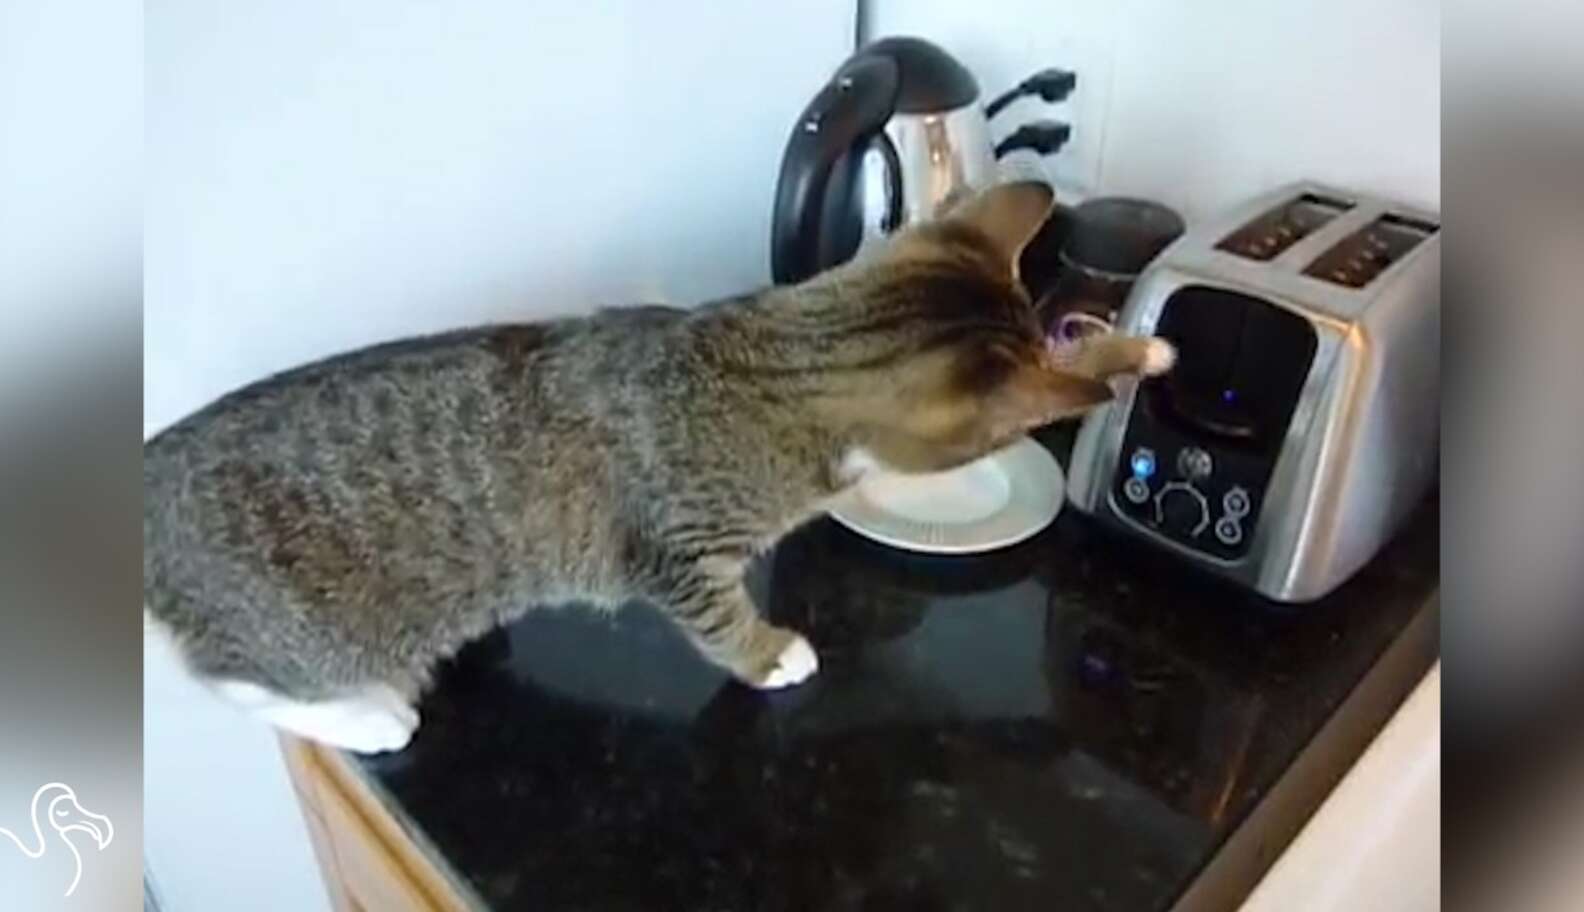 WATCH: Cats Investigating All Your Kitchen Stuff - The Dodo